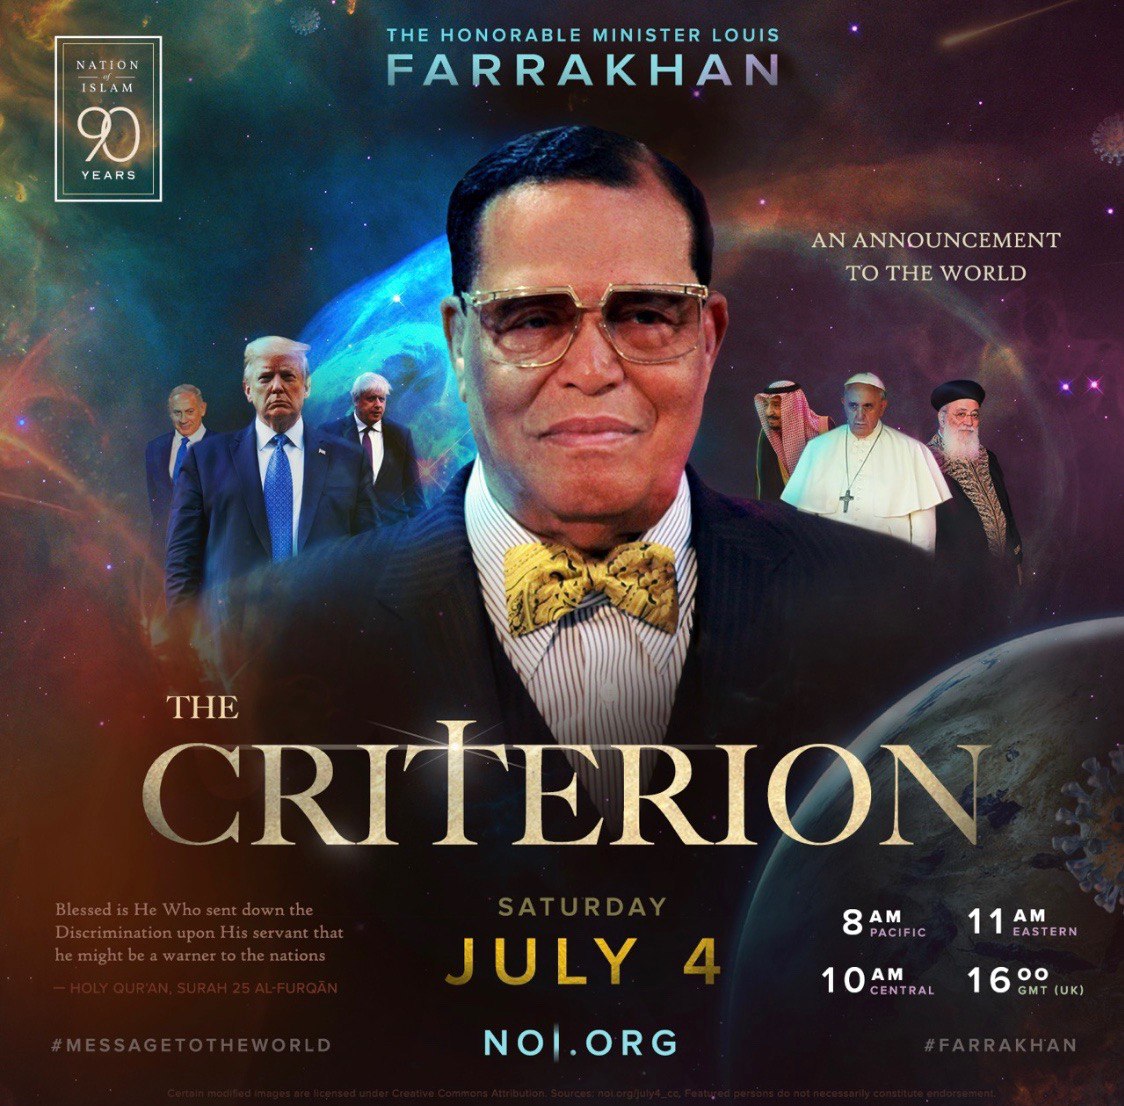 [Event] The Criterion [July 4th] The Honorable Minister Louis Farrakhan